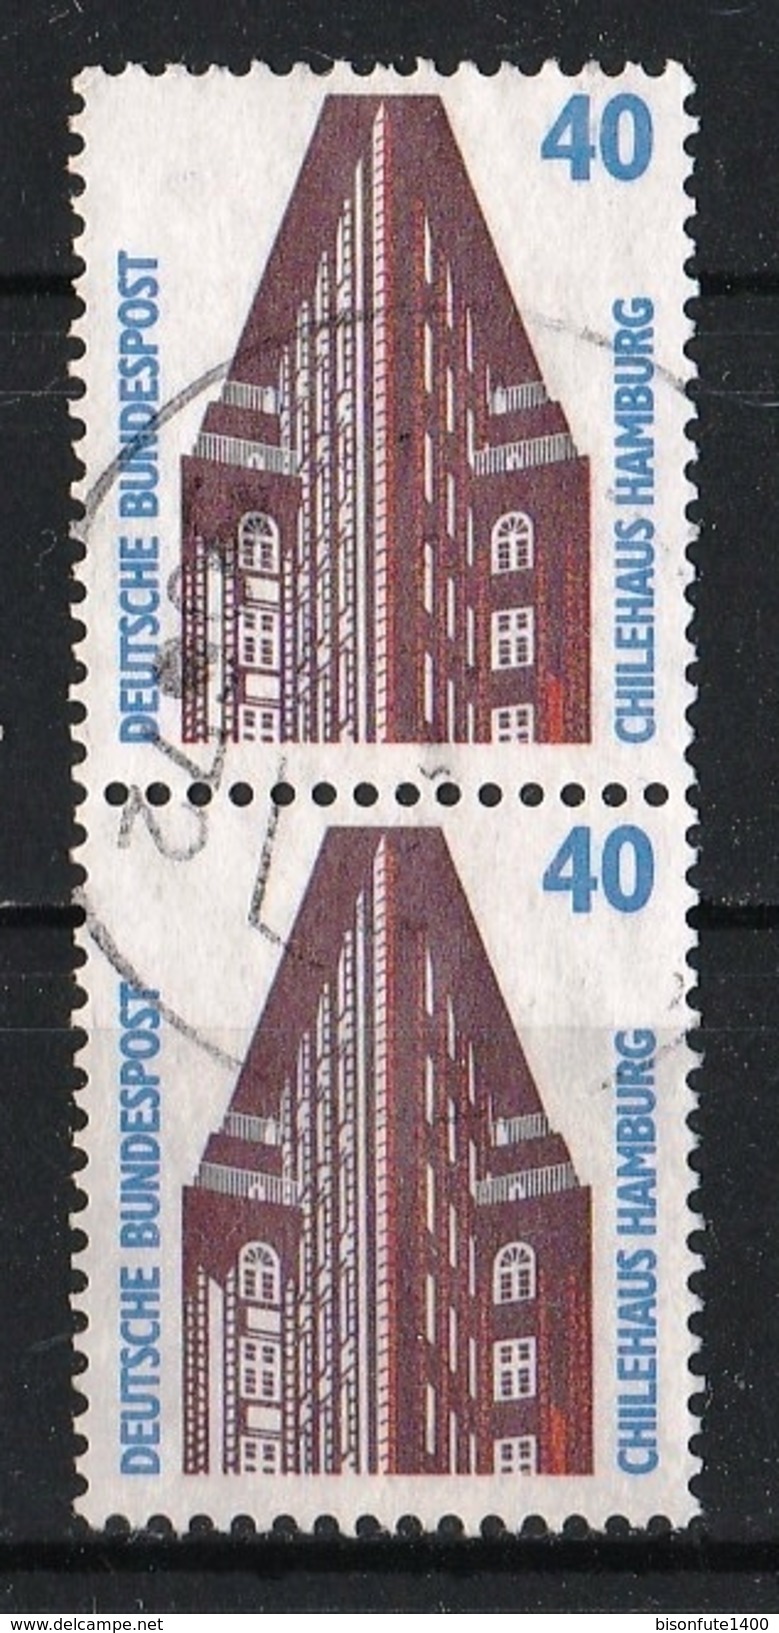 Allemagne Fédérale 1988 : Timbres Yvert & Tellier N° 1211 En Paire Verticale. - Used Stamps